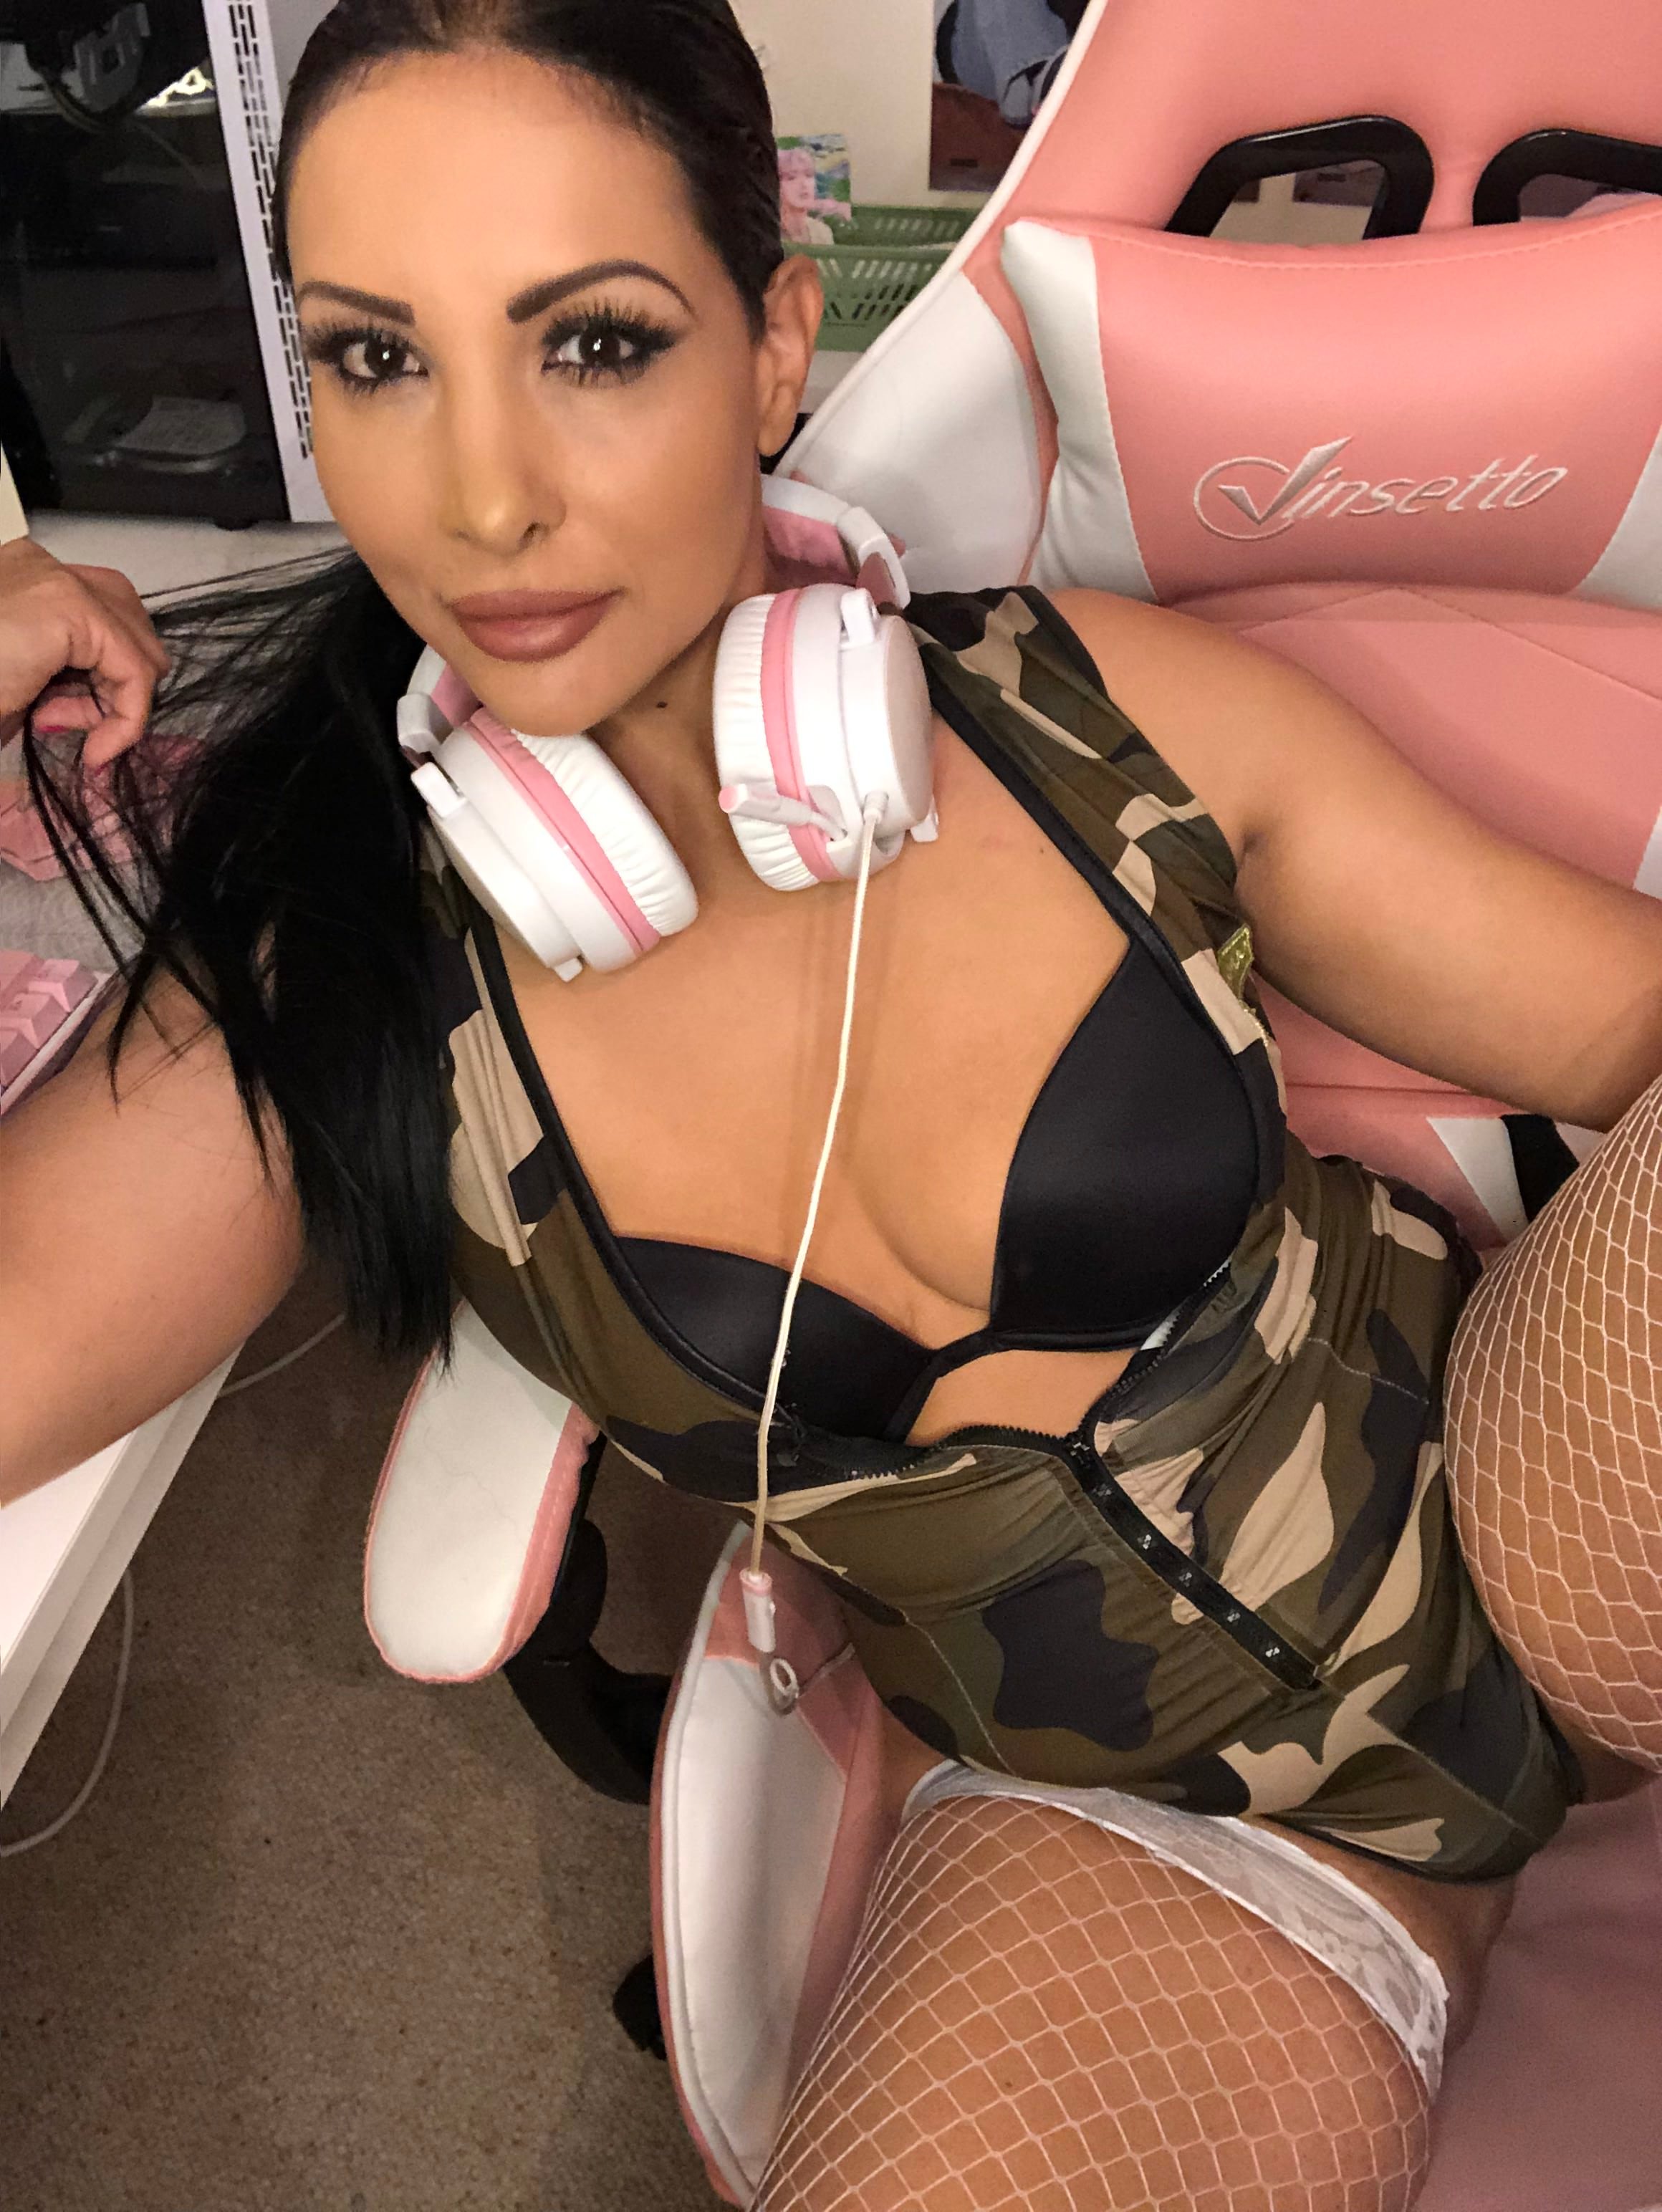 @MelissaMorganxo UK, 35 years old, love talking to people on my free page ♥️